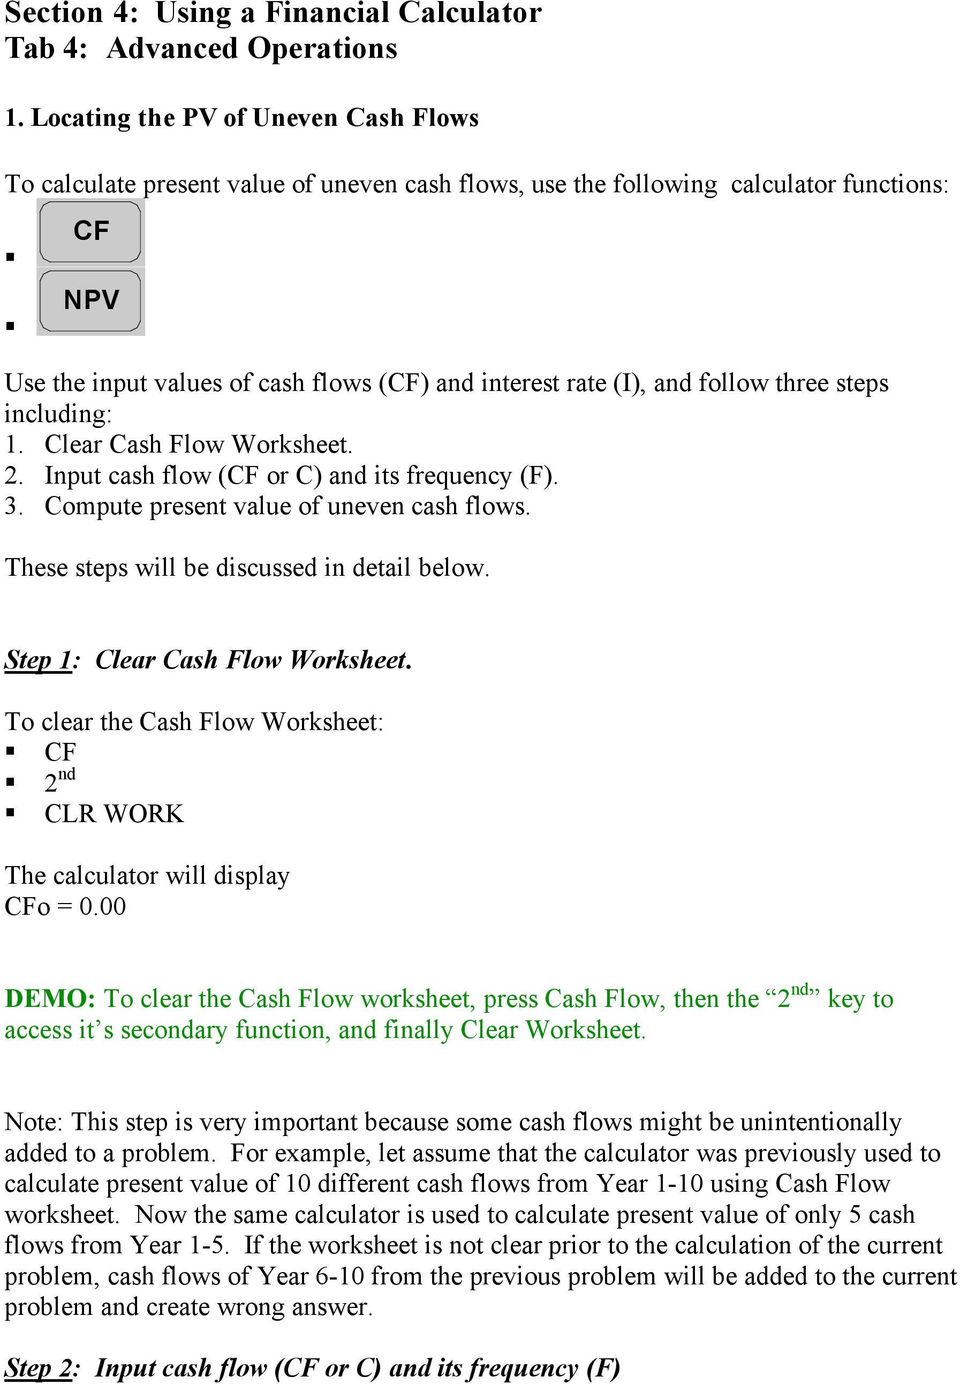 follow three steps including: 1. Clear Cash Flow Worksheet. 2. Input cash flow (CF or C) and its frequency (F). 3. Compute present value of uneven cash flows.